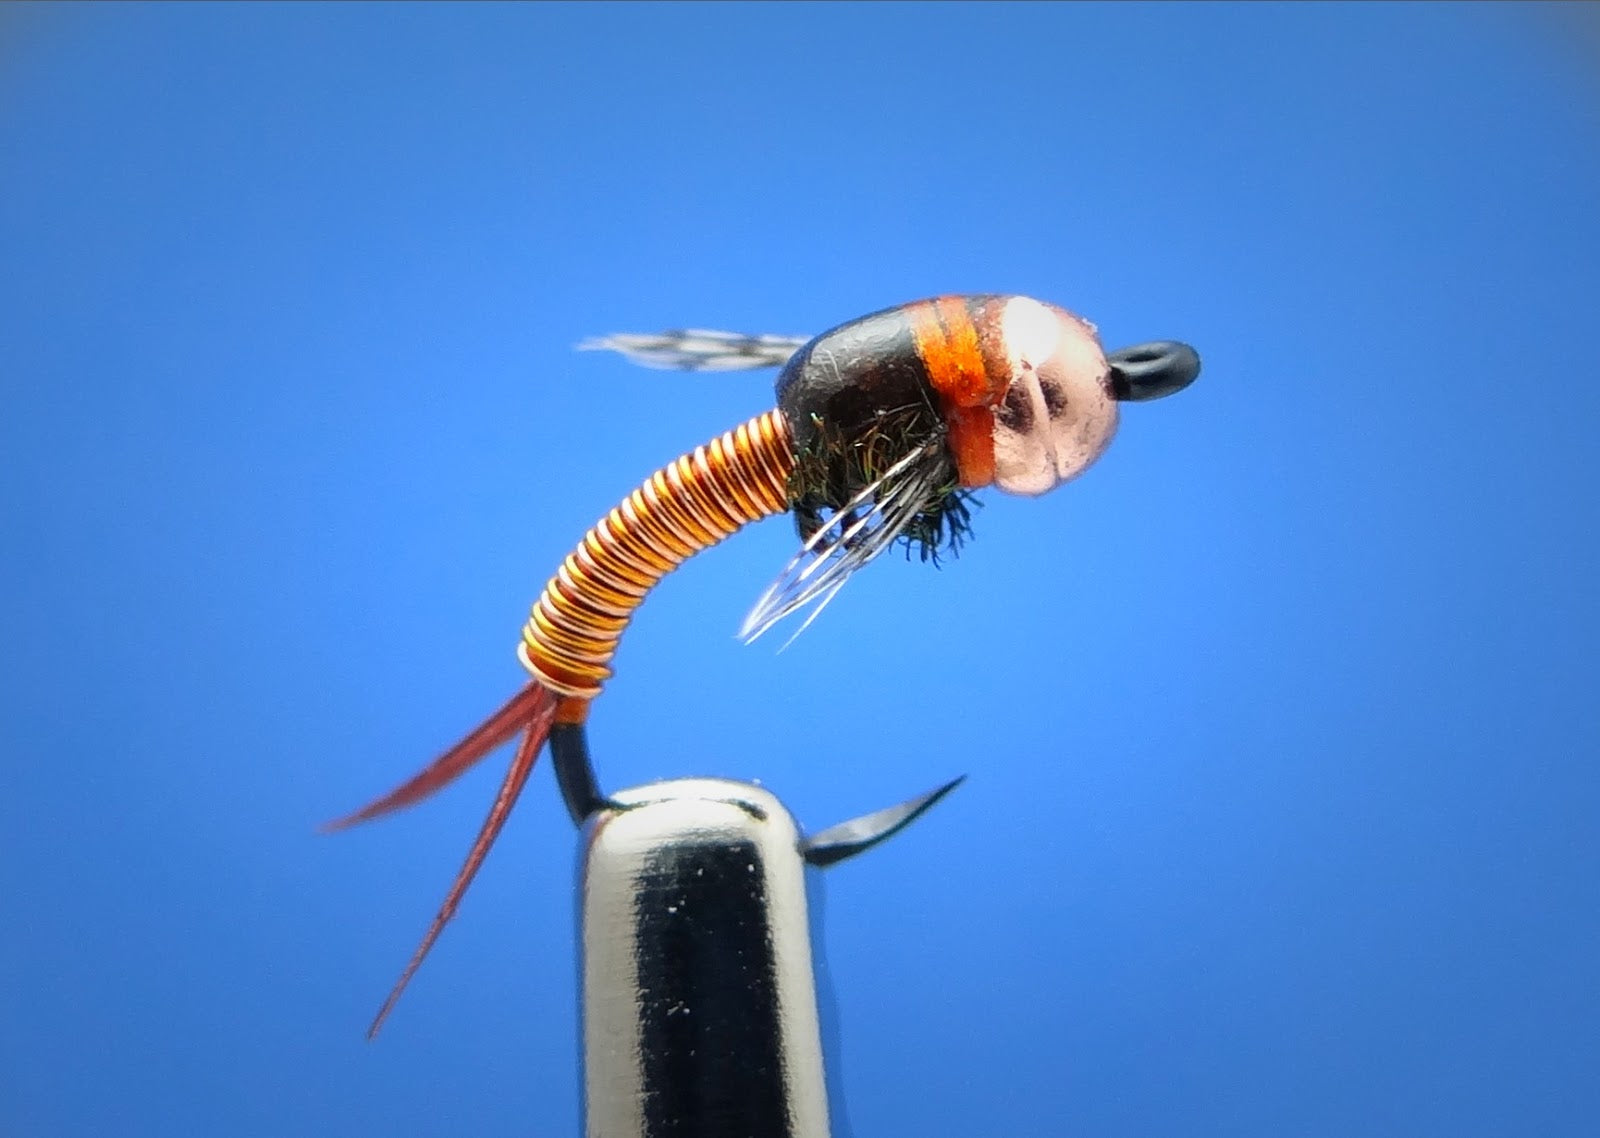 Tying and Fishing Tiny Flies: The worlds smallest hook today – Mustad,  Tiemco or Varivas?